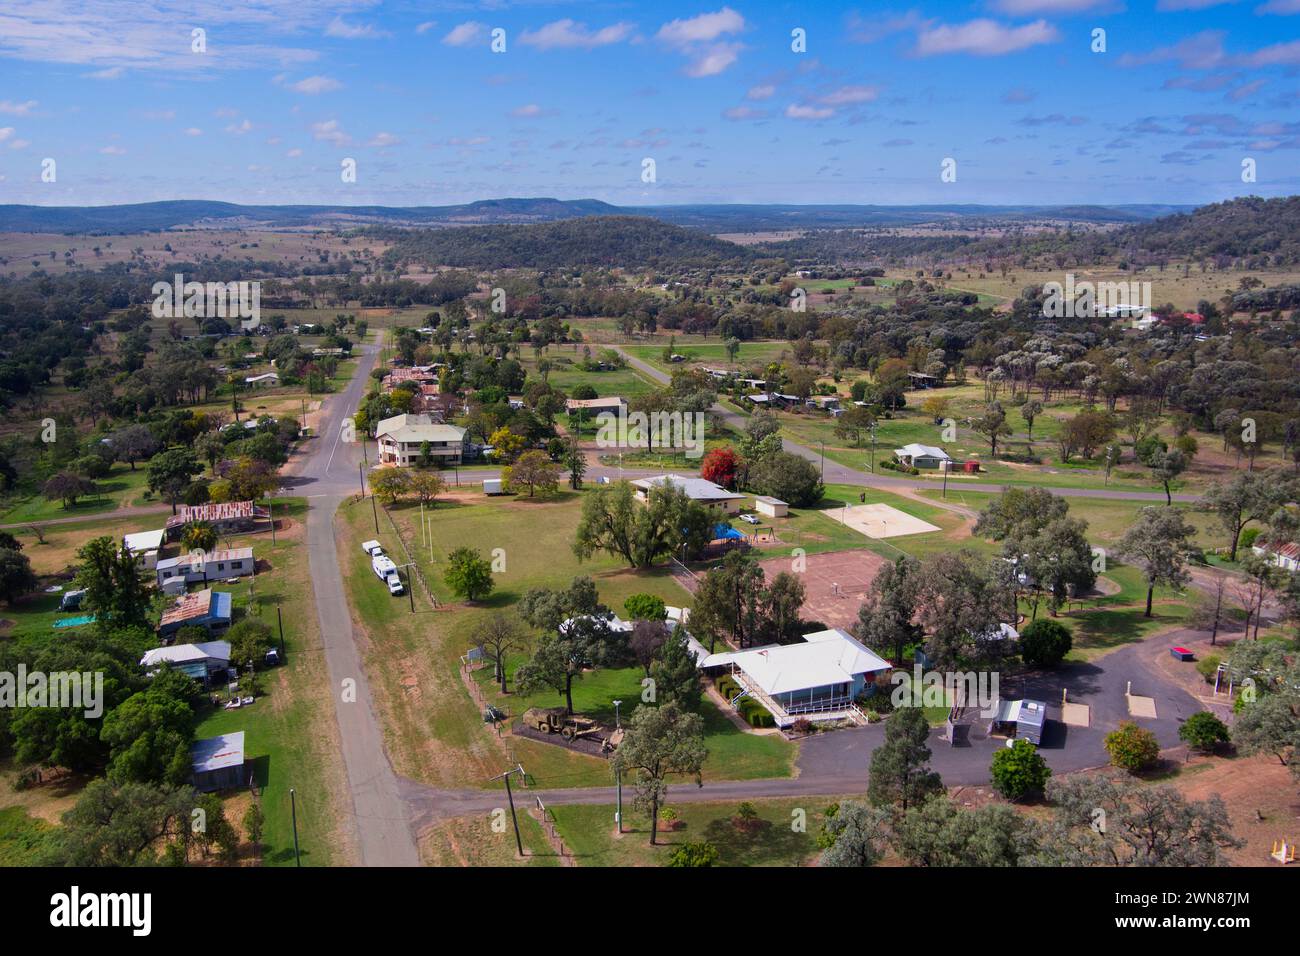 Aerial of Third Ave as it passes through the gold mining village of Cracow Queensland Australia Stock Photo